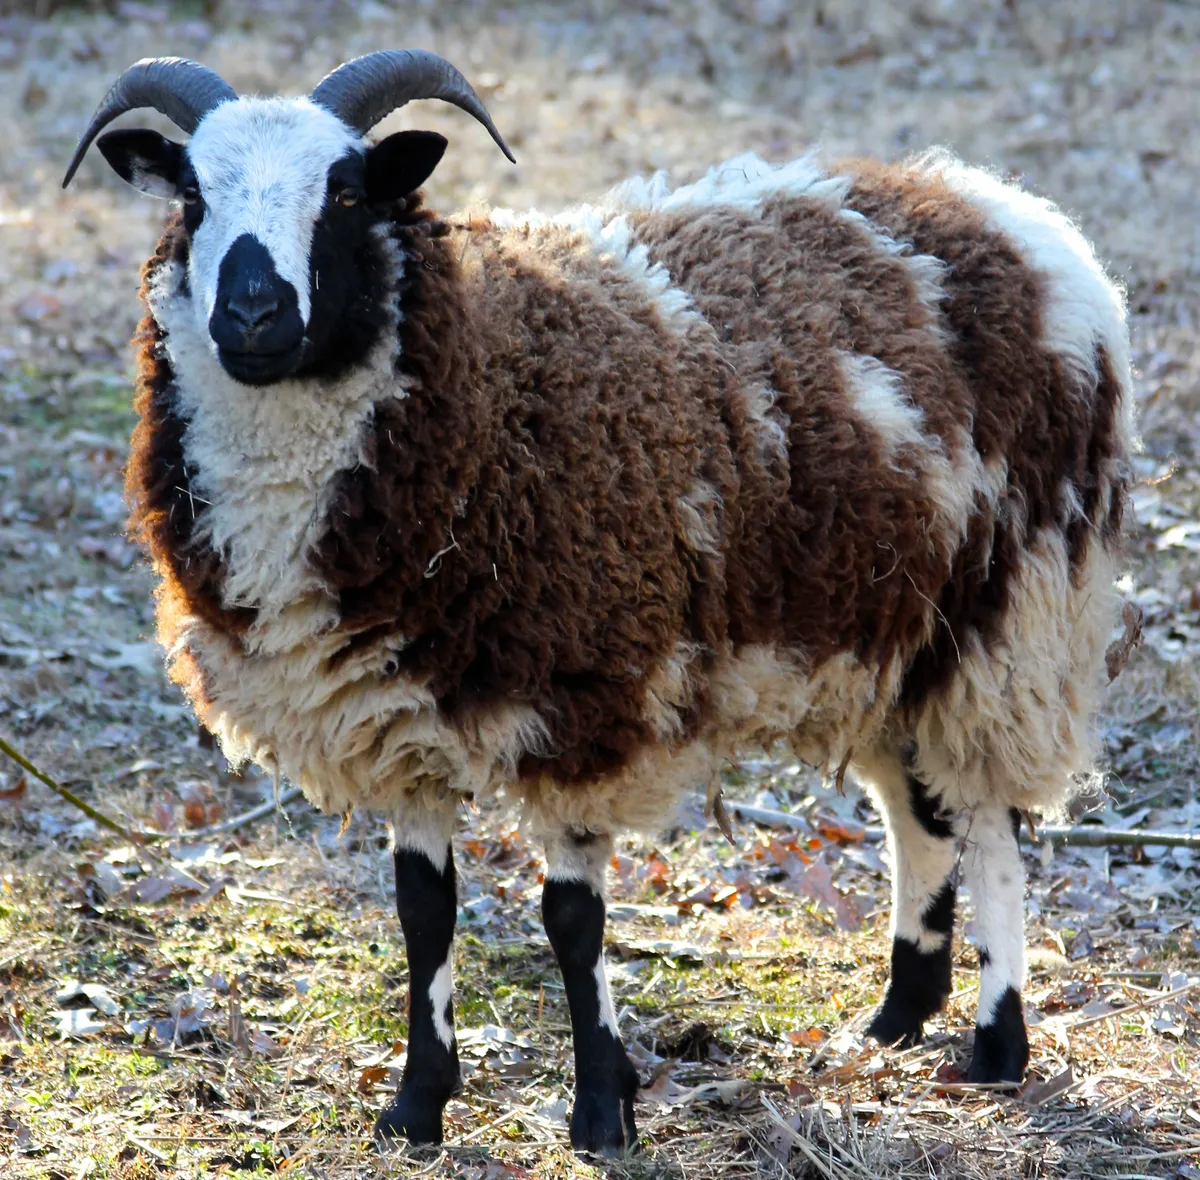 Two-horned Jacob sheep with brown and white coat of wool